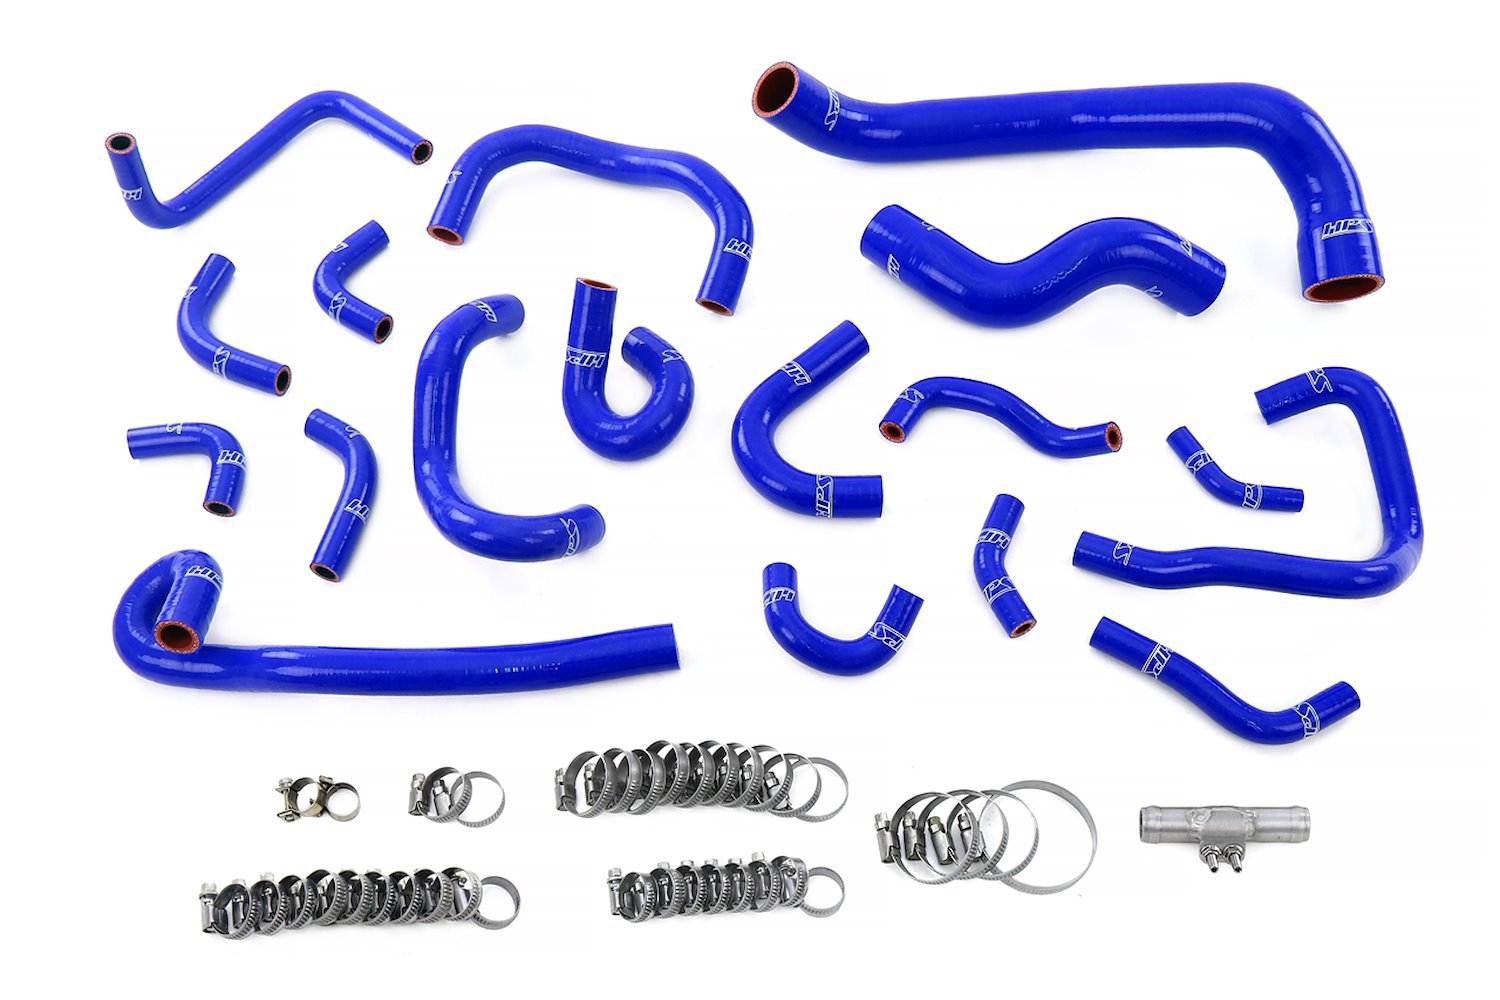 57-2136-BLUE Coolant Hose Kit, 3-Ply Reinforced Silicone Coolant & IDle Air Control Hoses